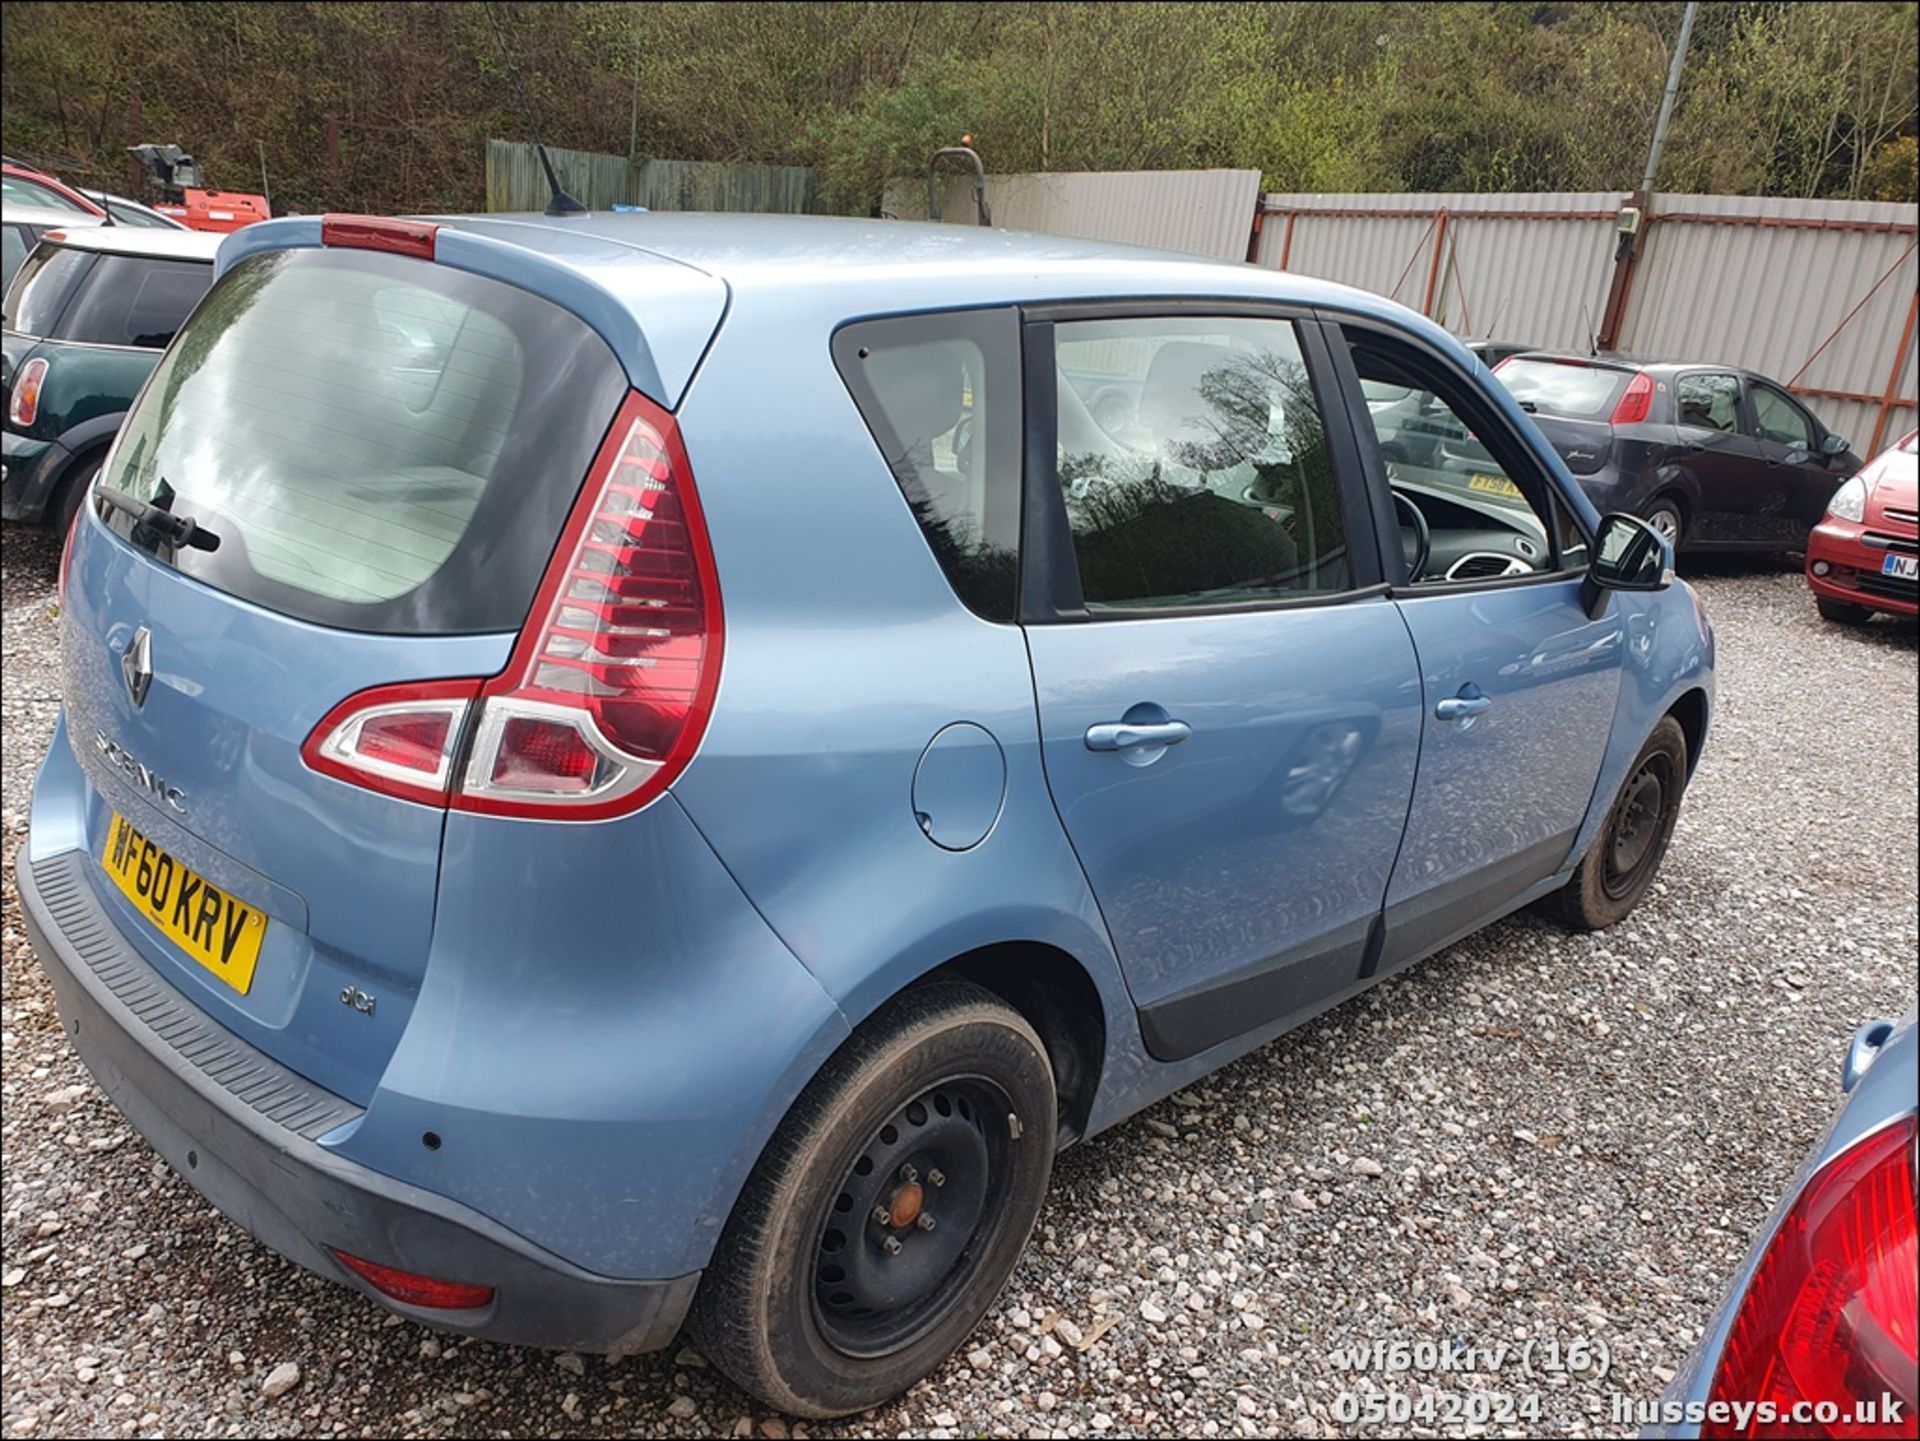 10/60 RENAULT SCENIC EXPRESSION DCI 105 - 1461cc 5dr MPV (Blue) - Image 17 of 50